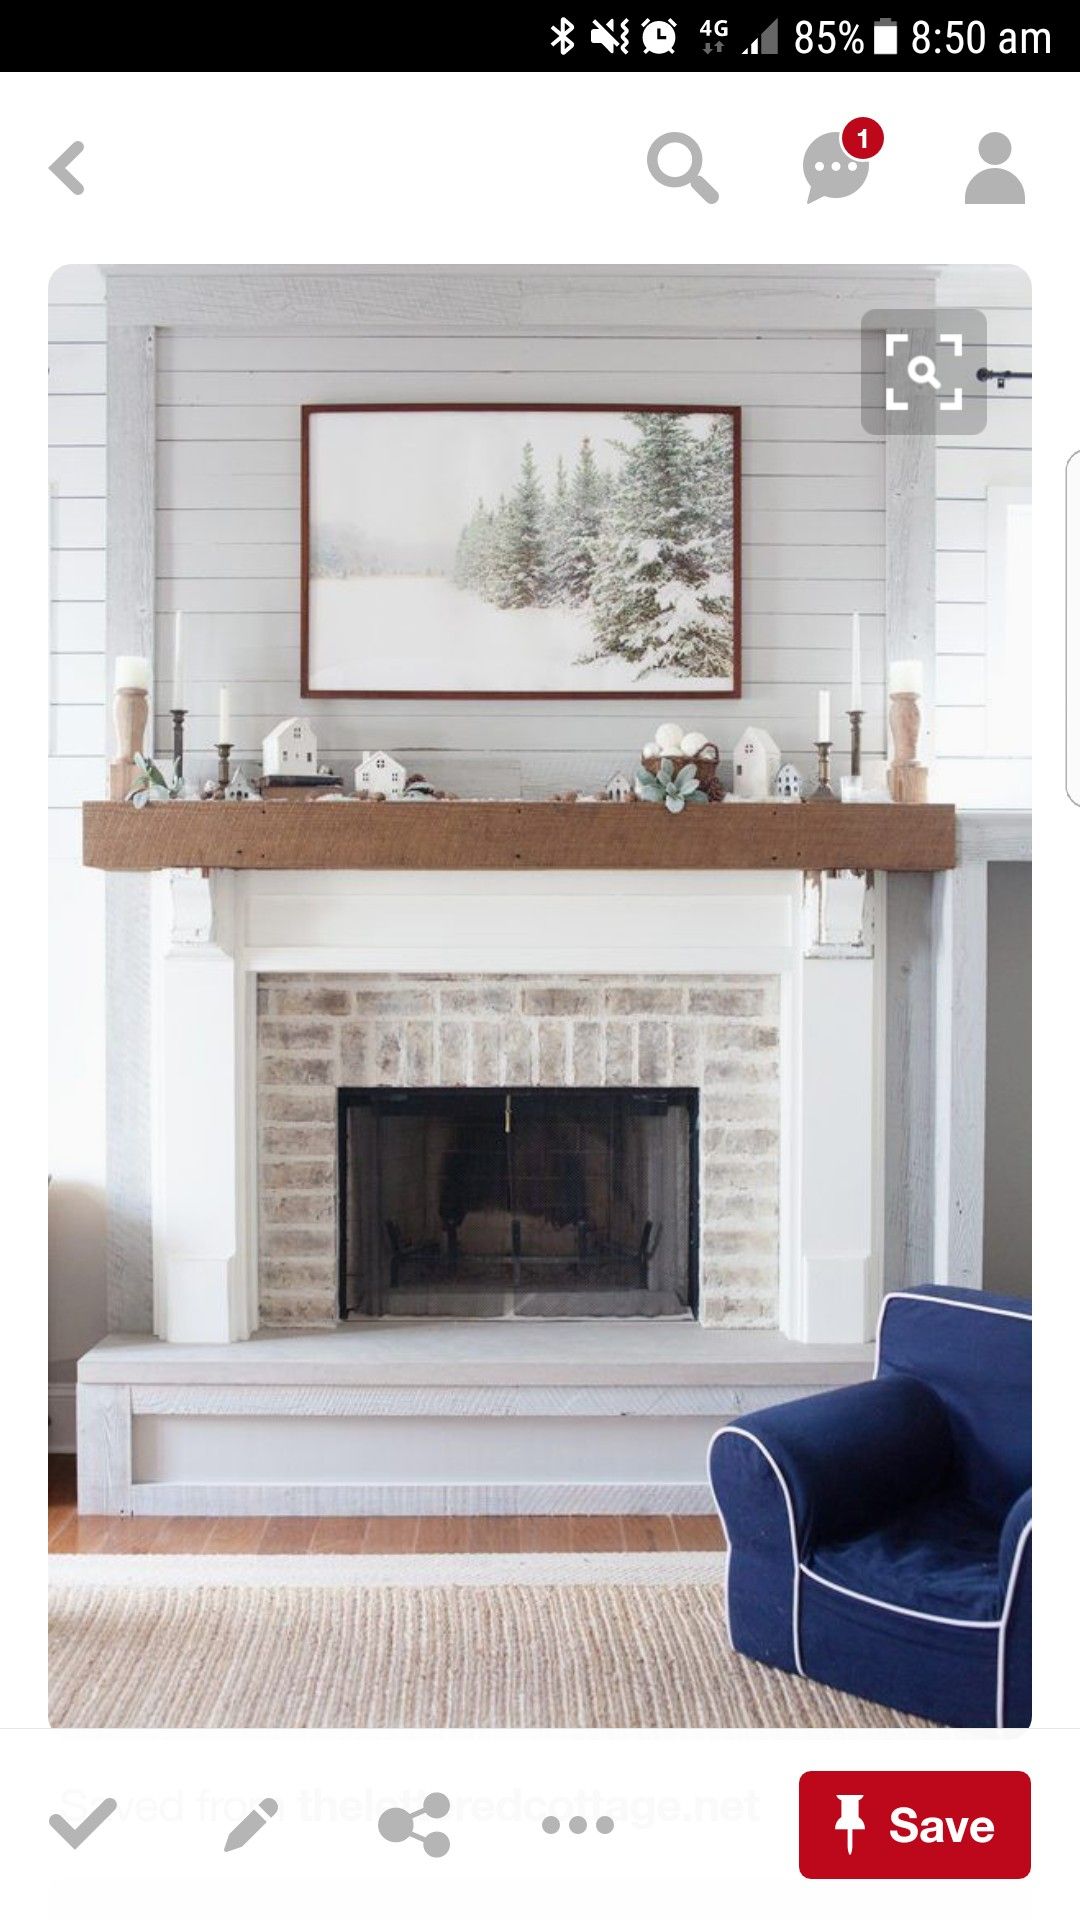 Fireplace Hood Awesome Imagine This sort Of Look for Our Range Hood Brick Shiplap